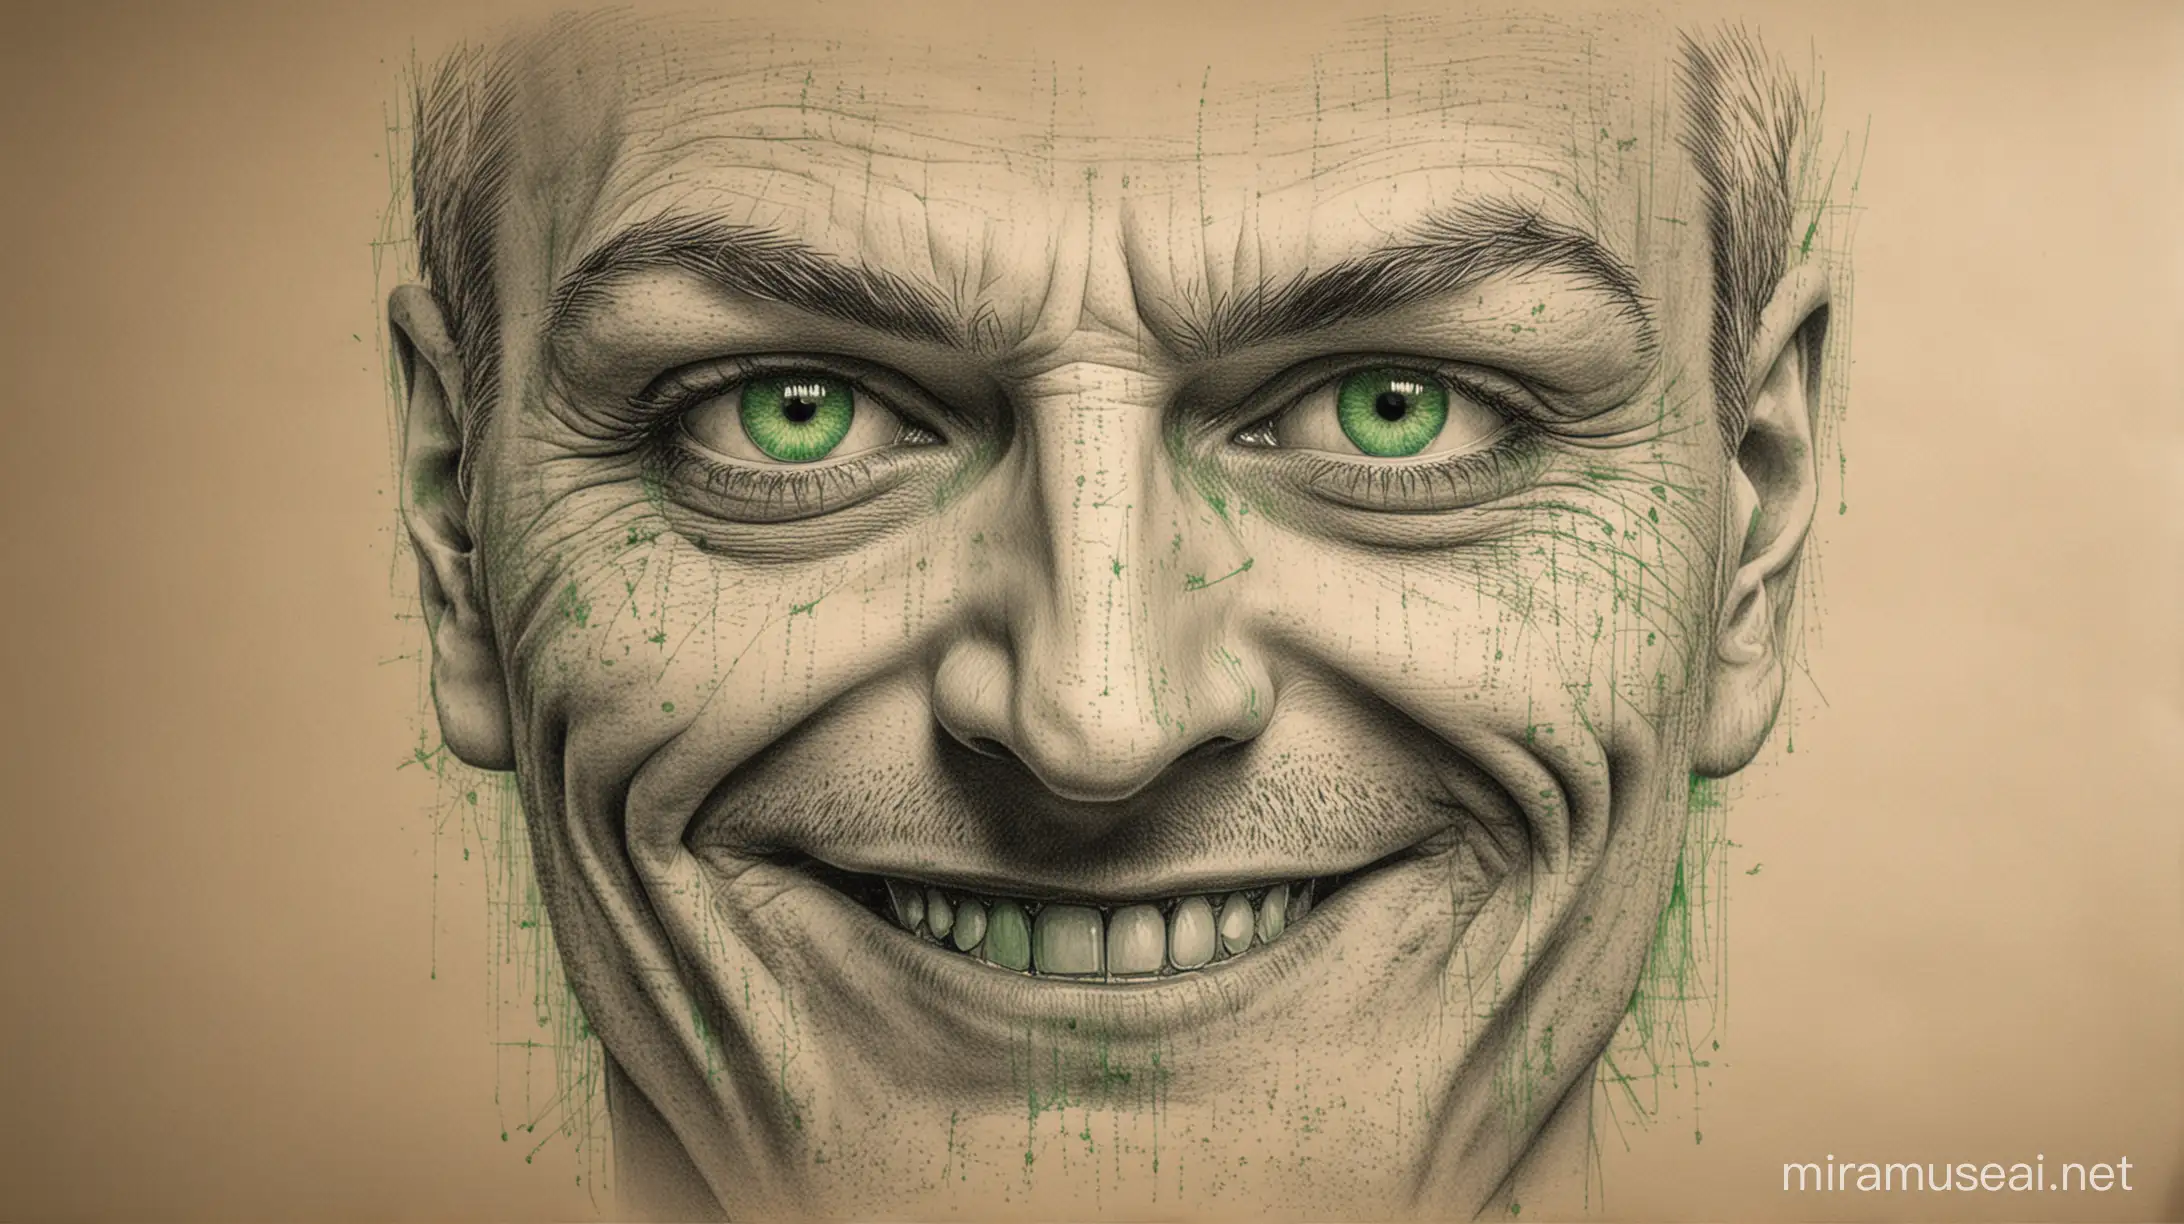 
face of a sinister man drawn on sheet with piercing green eyes and disturbing sinister smile drawn on a paper